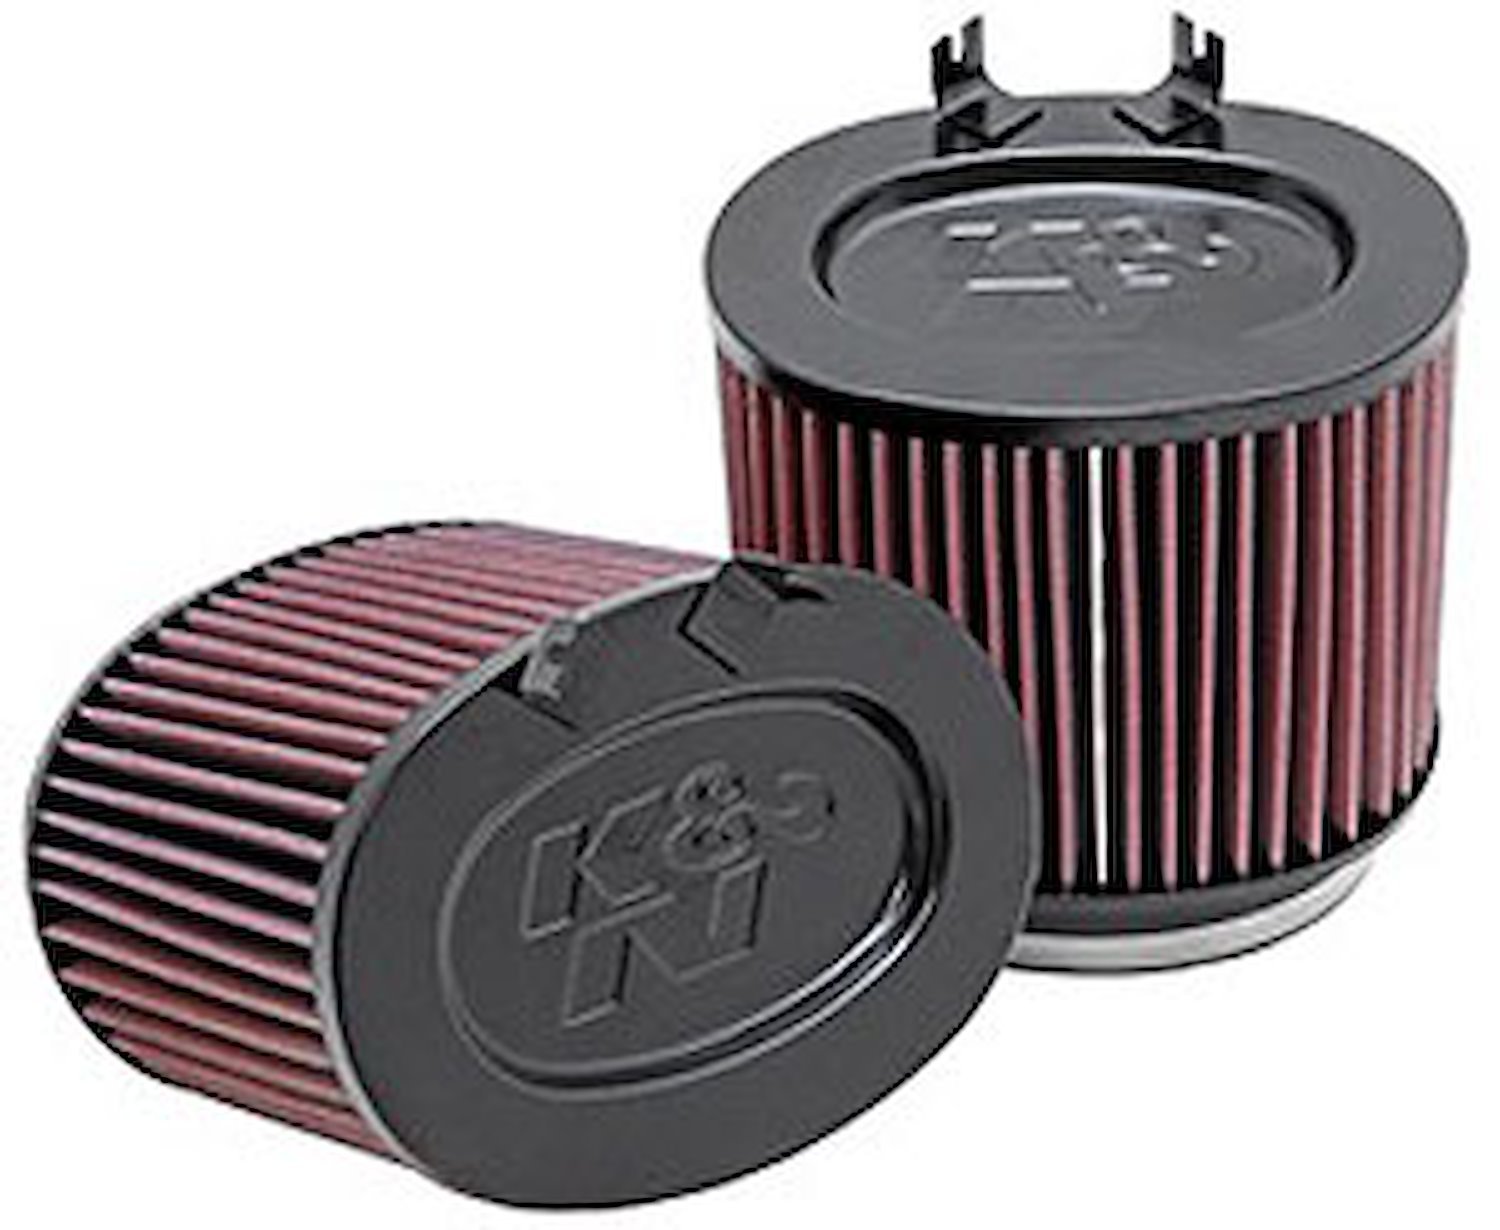 K&N s replacement air filters are designed to increase horsepower and acceleration while providing e